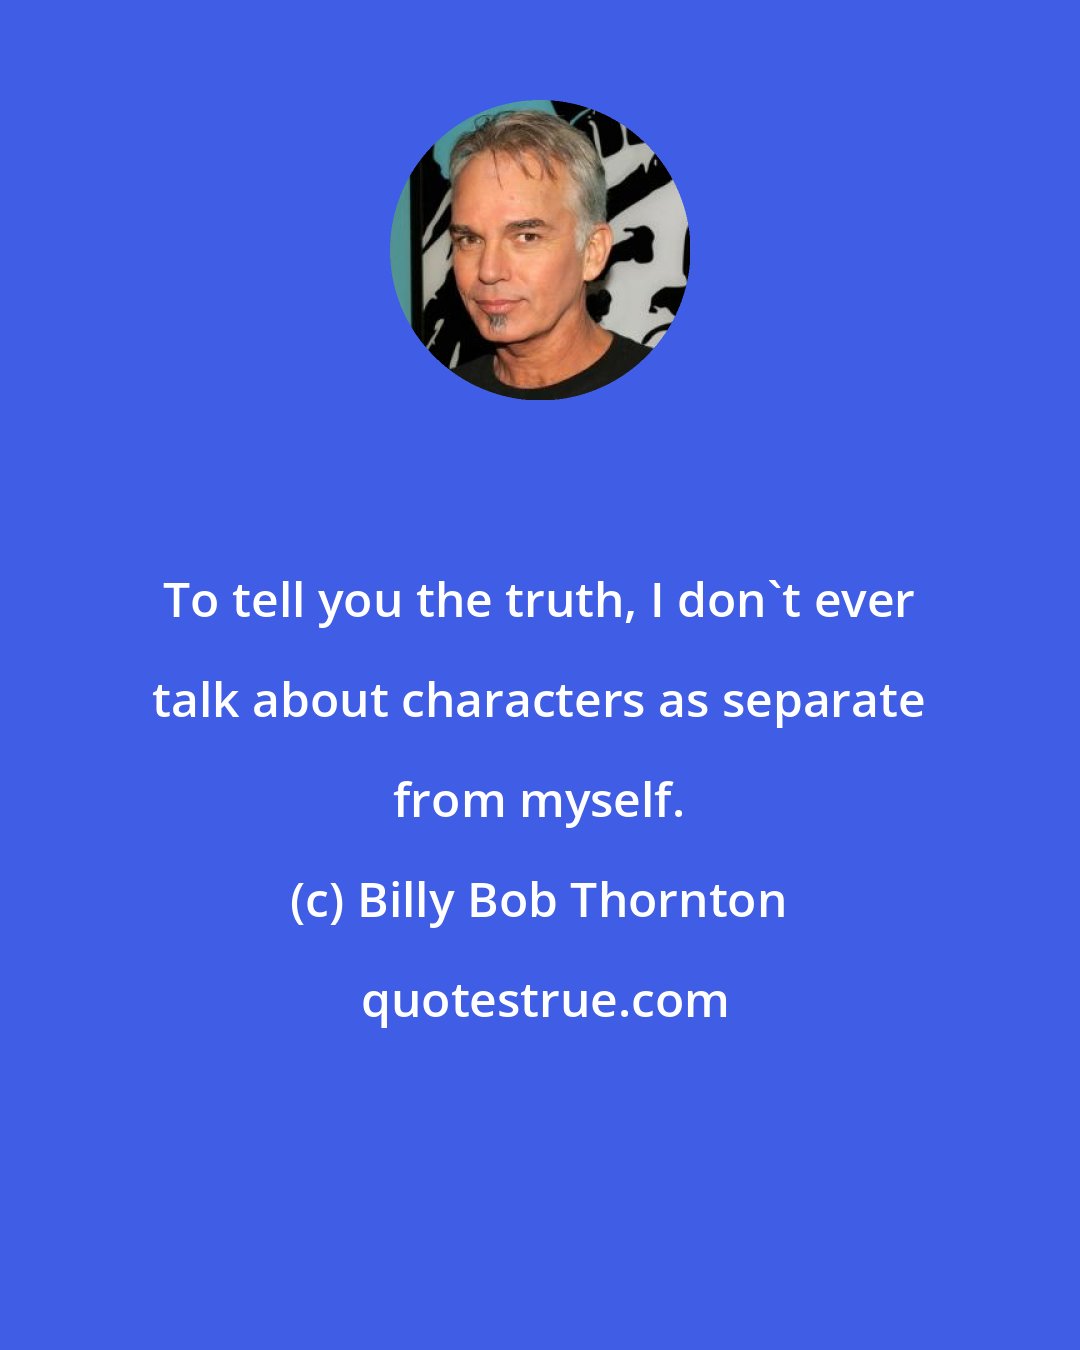 Billy Bob Thornton: To tell you the truth, I don't ever talk about characters as separate from myself.